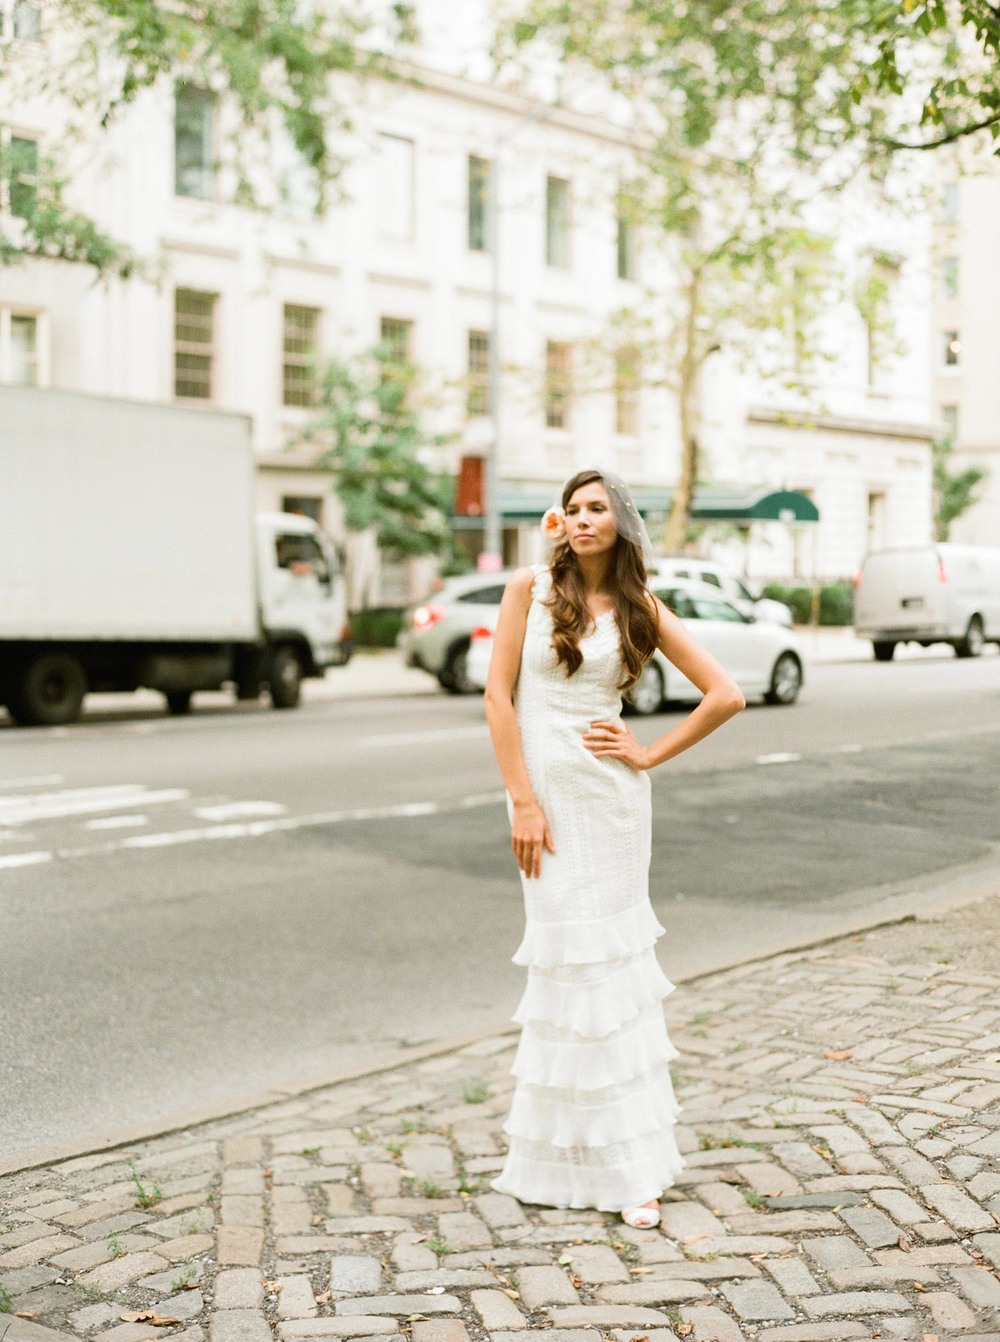 The Flower Bride- NYC Shoot- Lindsay Madden Photography-51 Full Aperture Floral copy.jpeg